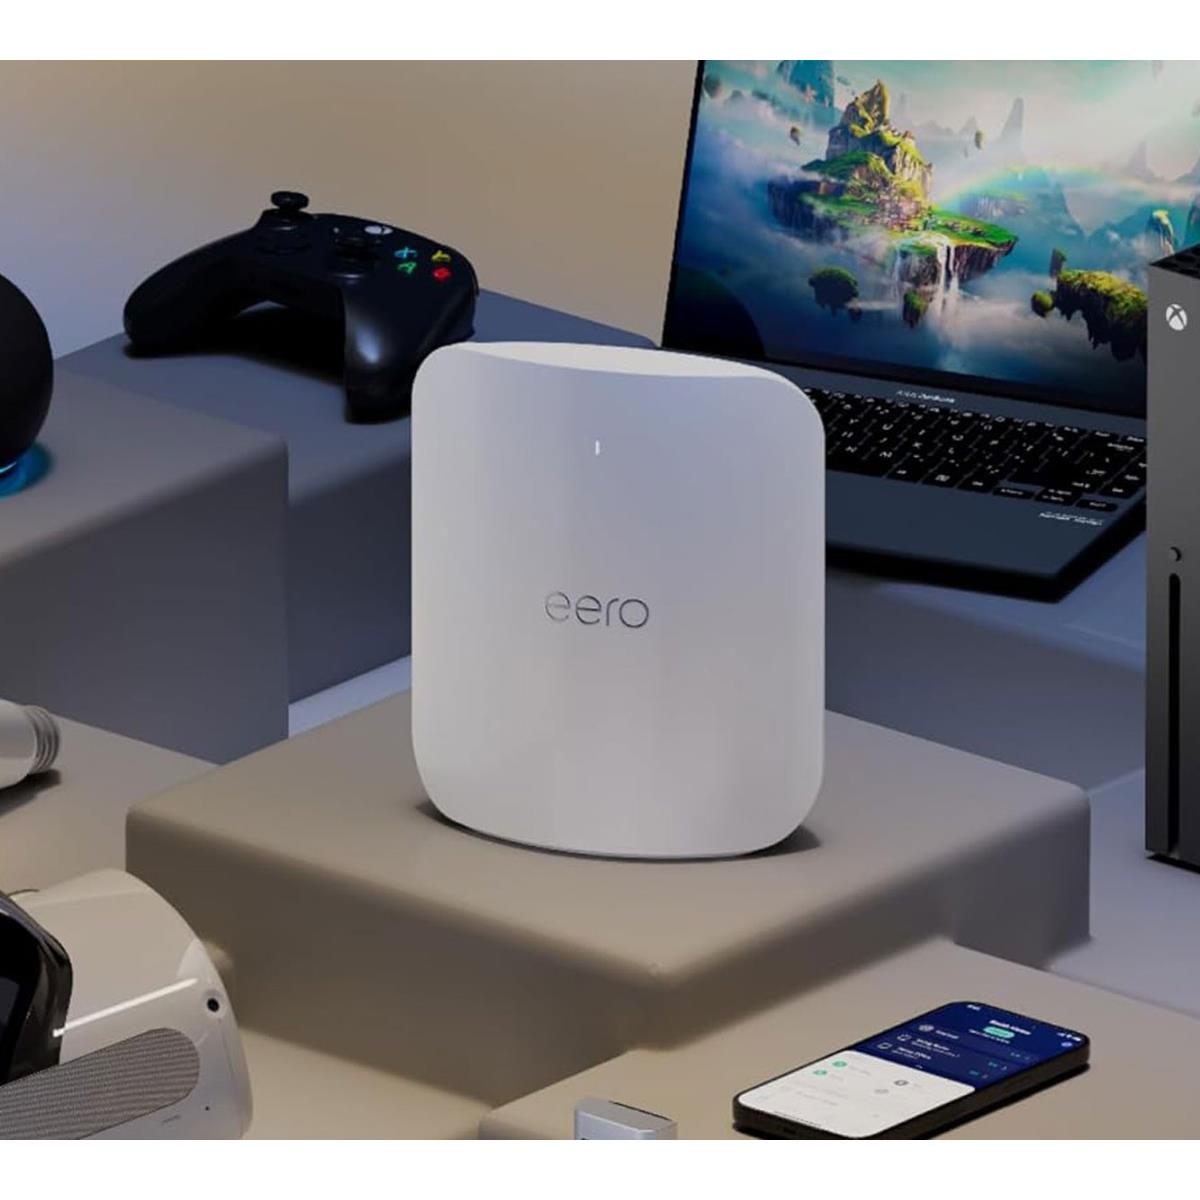 Eero's new Max 7 is a powerful router with Wi-Fi 7 support - The Verge